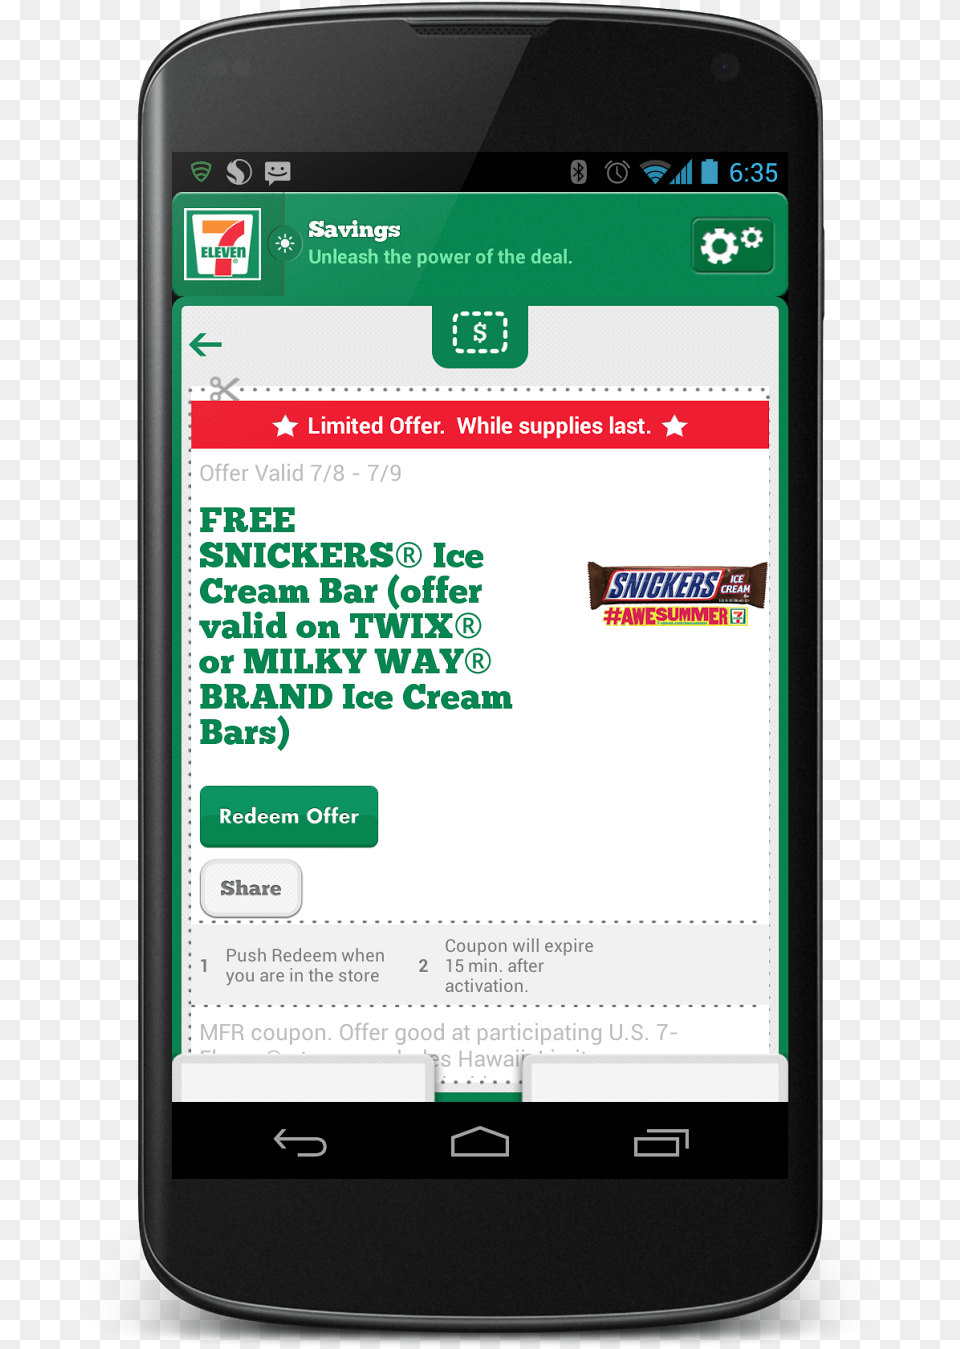 Hurry For Your Snickers Ice Cream Bar While Supplies 7 Eleven App Coupon, Electronics, Mobile Phone, Phone Free Png Download